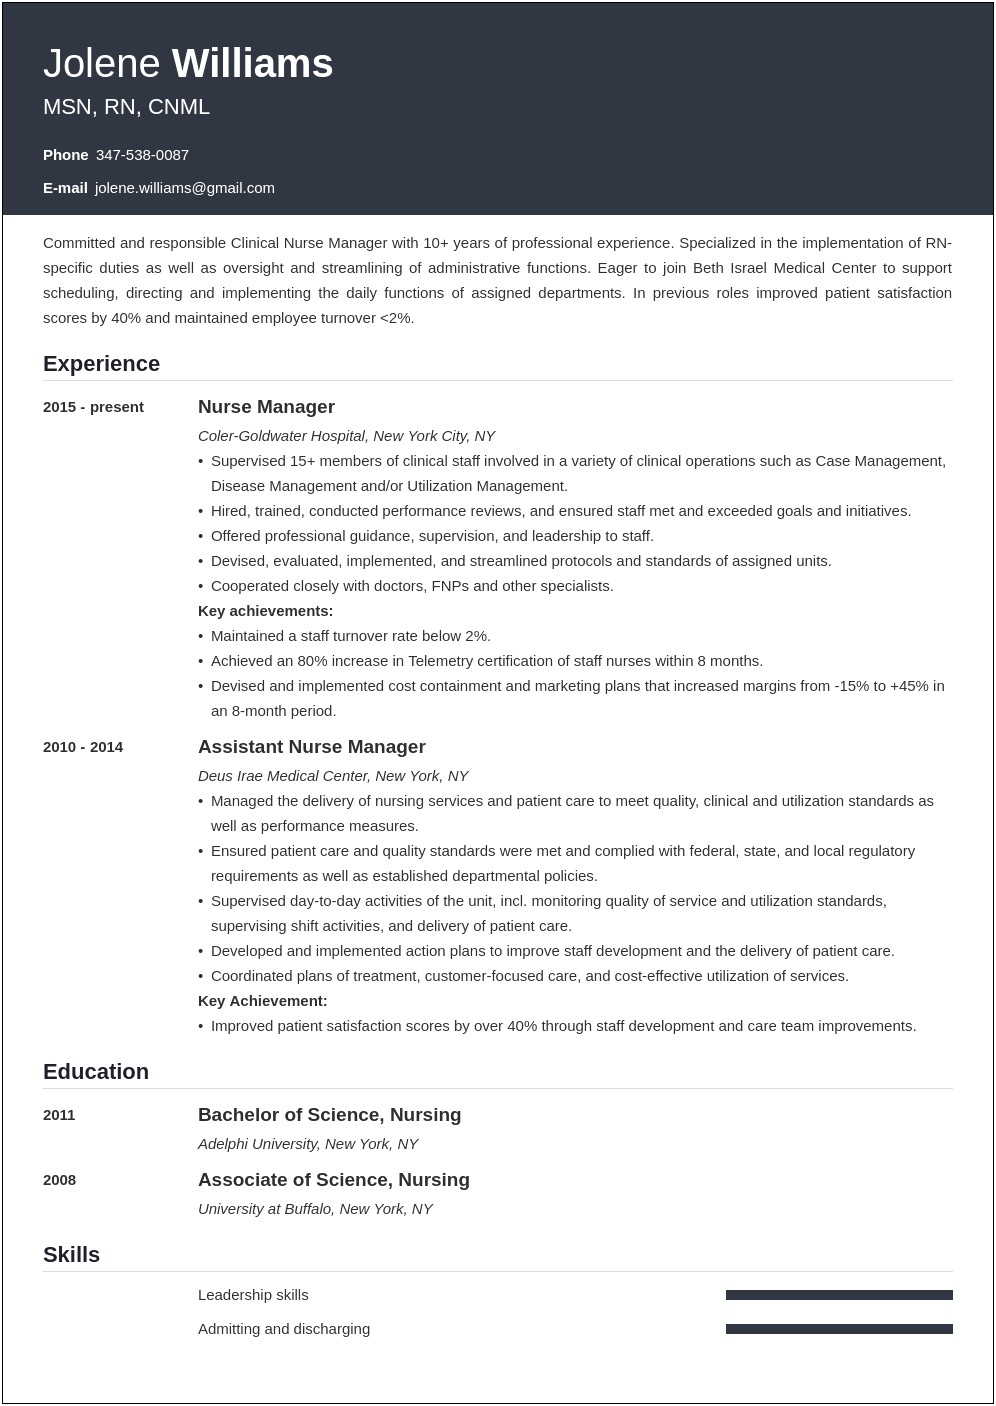 Do Nurses Have Medical Practice Experience On Resume